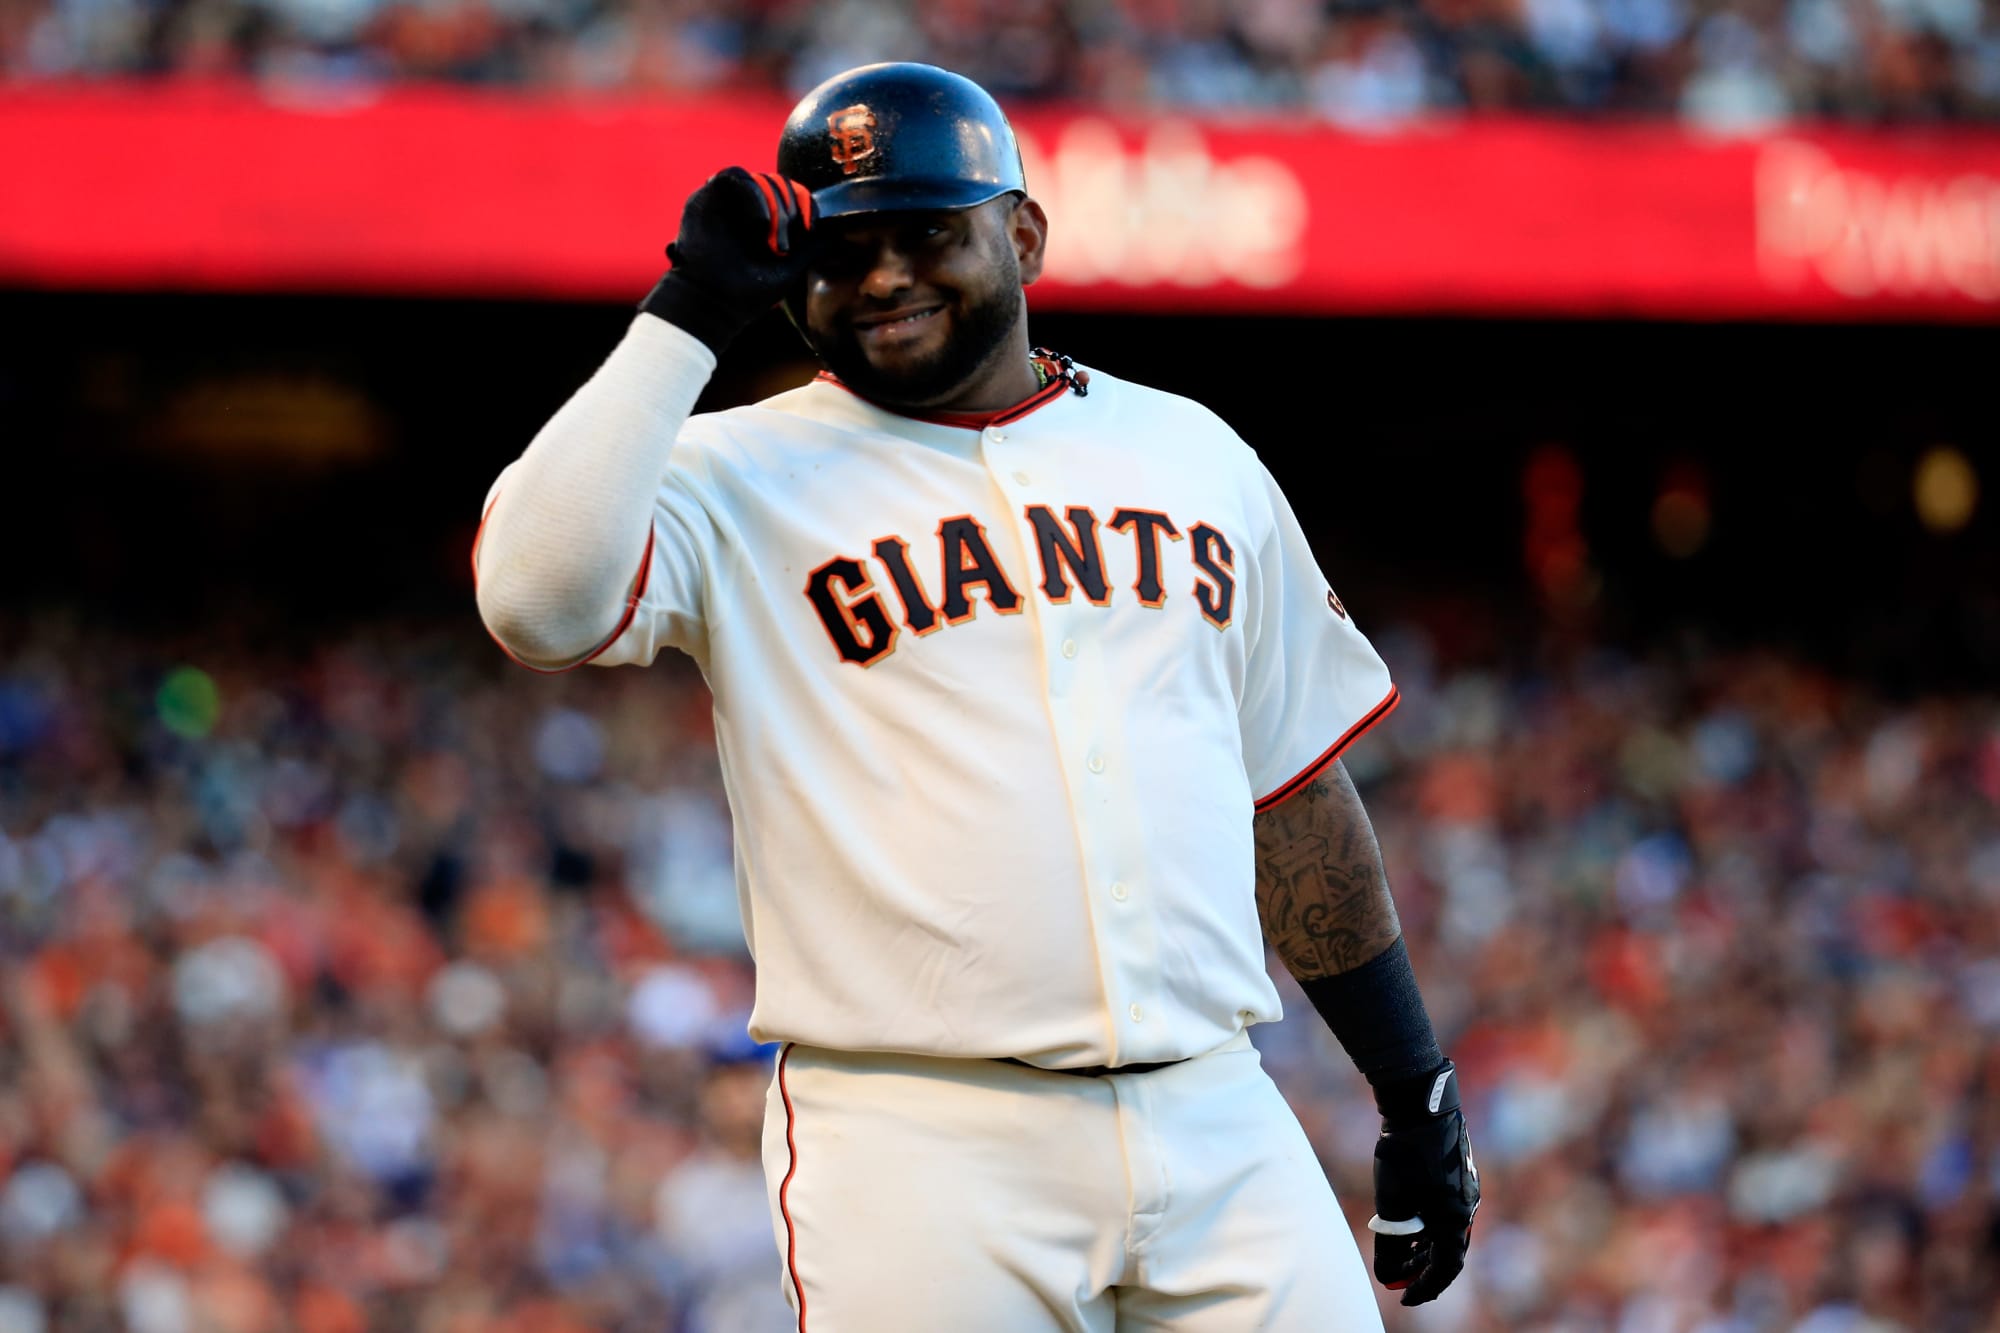 Giants' Pablo Sandoval tells Bruce Bochy he'd be glad to pitch again